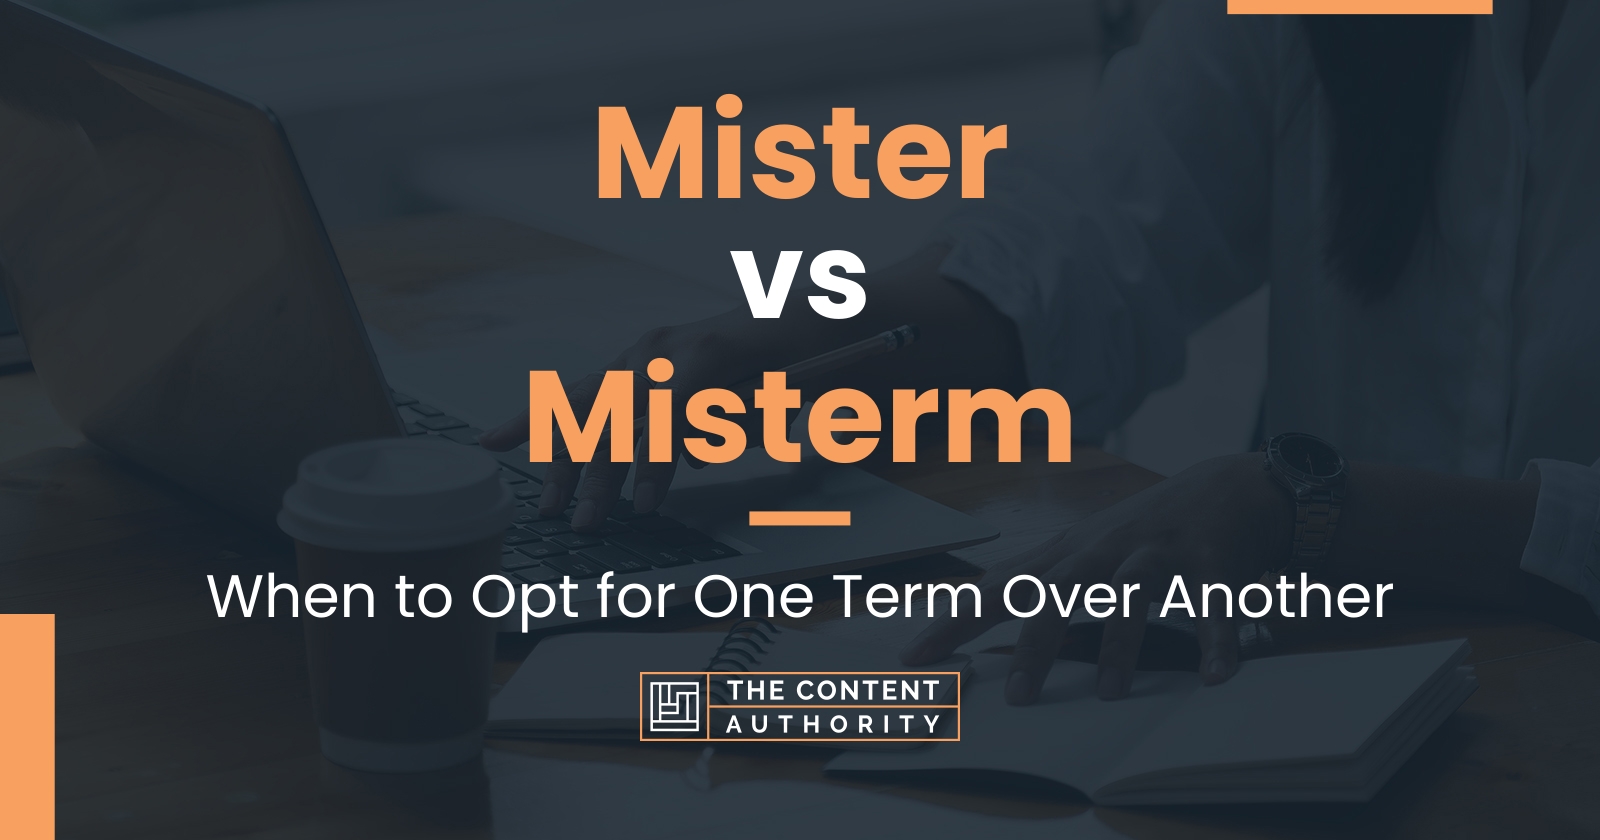 Mister vs Misterm: When to Opt for One Term Over Another